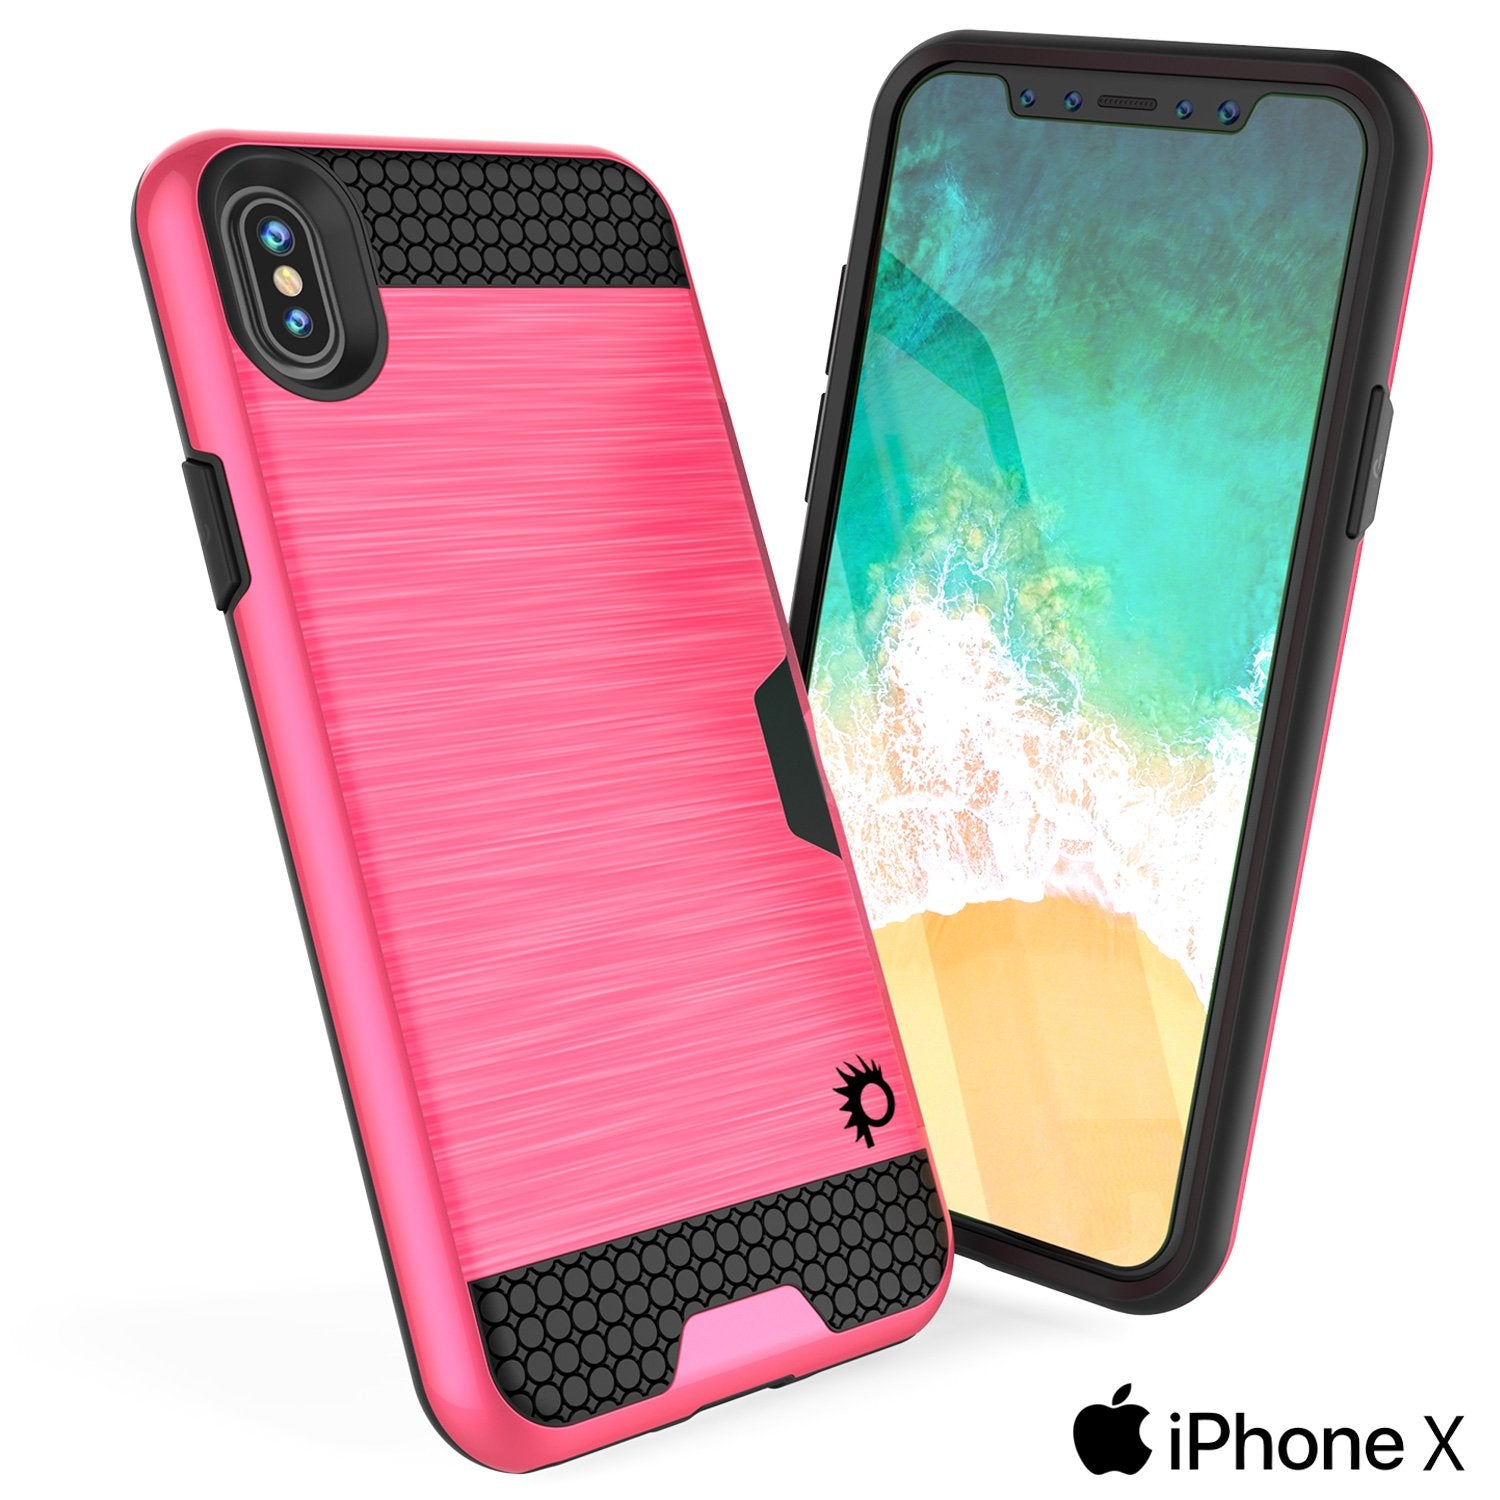 iPhone X Case, PUNKcase [SLOT Series] Slim Fit Dual-Layer Armor Cover & Tempered Glass PUNKSHIELD Screen Protector for Apple iPhone X [Pink]